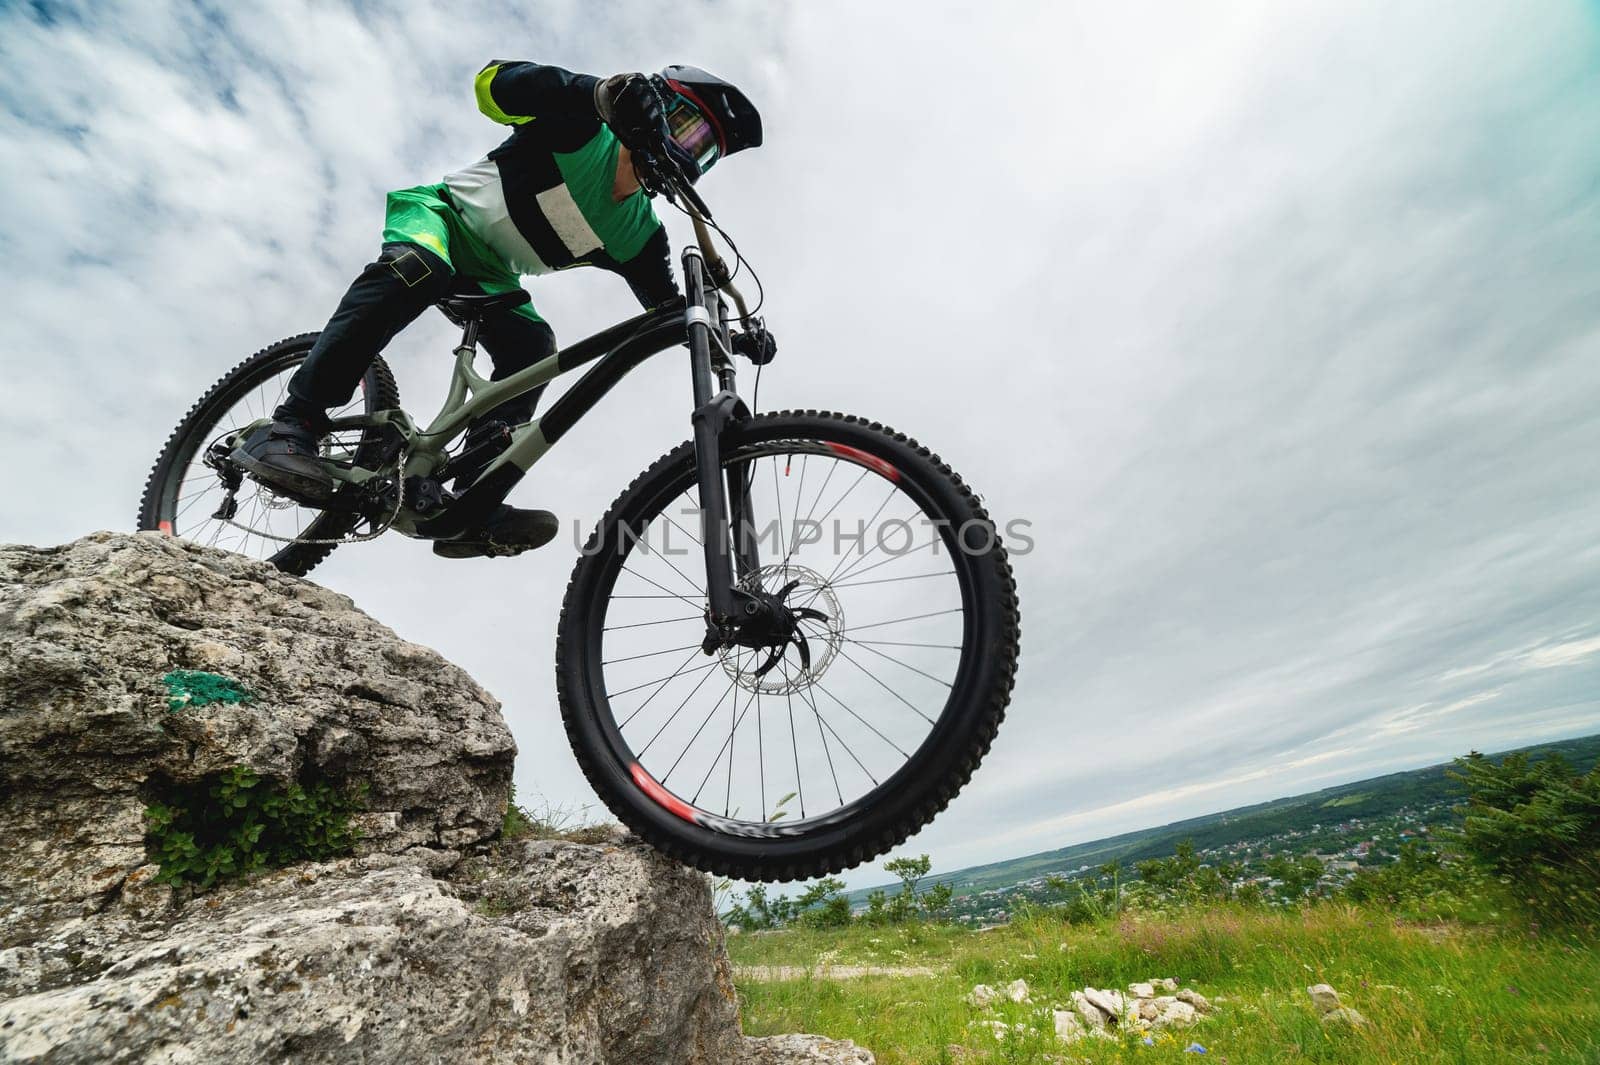 brave cyclist goes down the rocks. Test site for mountain bikers. A guy in protection rides off-road, wide angle view from below by yanik88